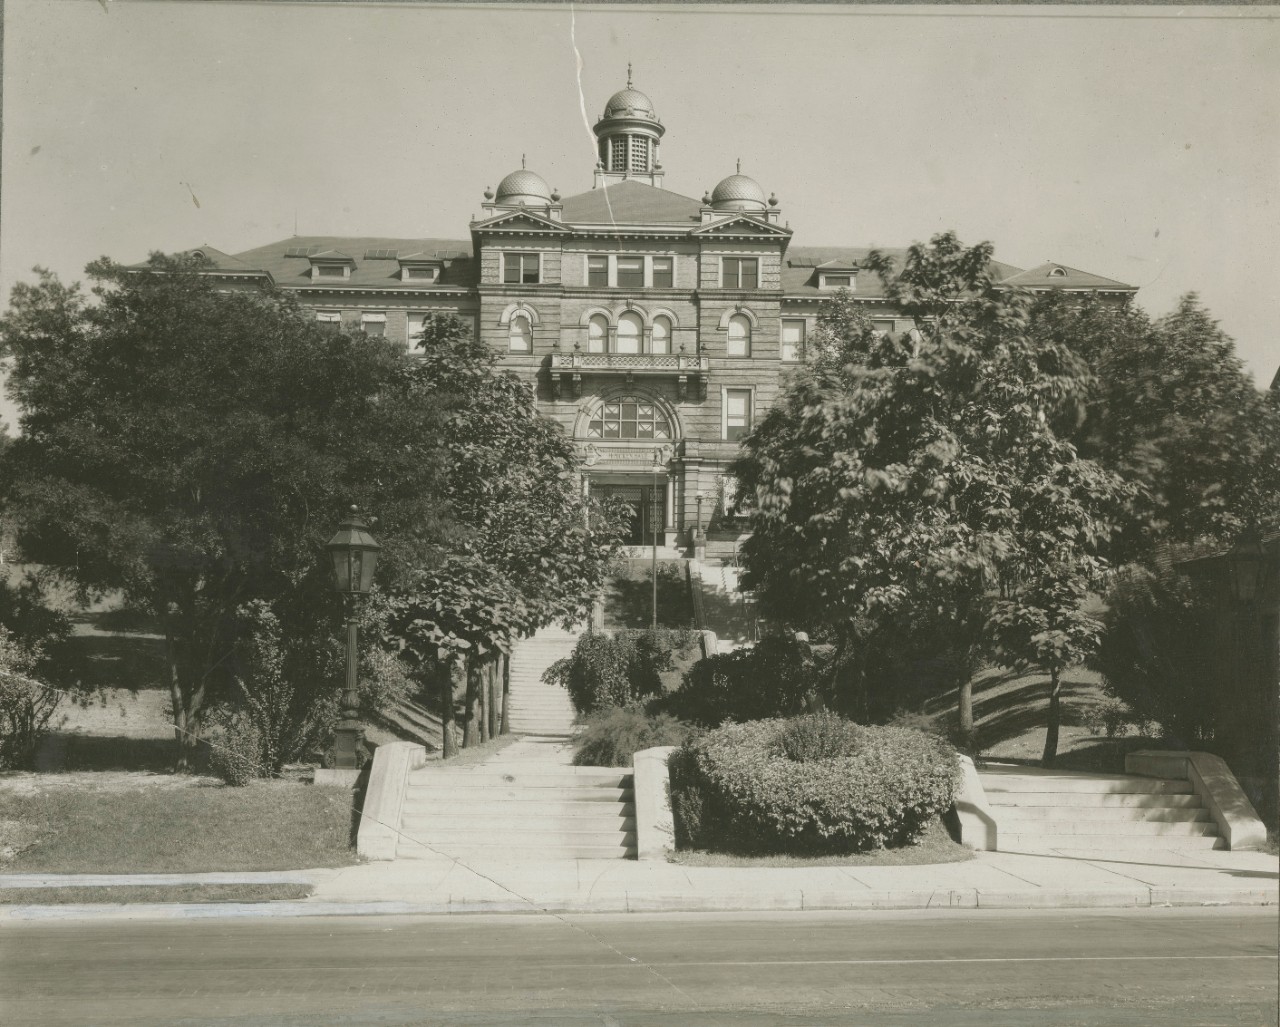 McMicken Hall image from UC Library Archives.